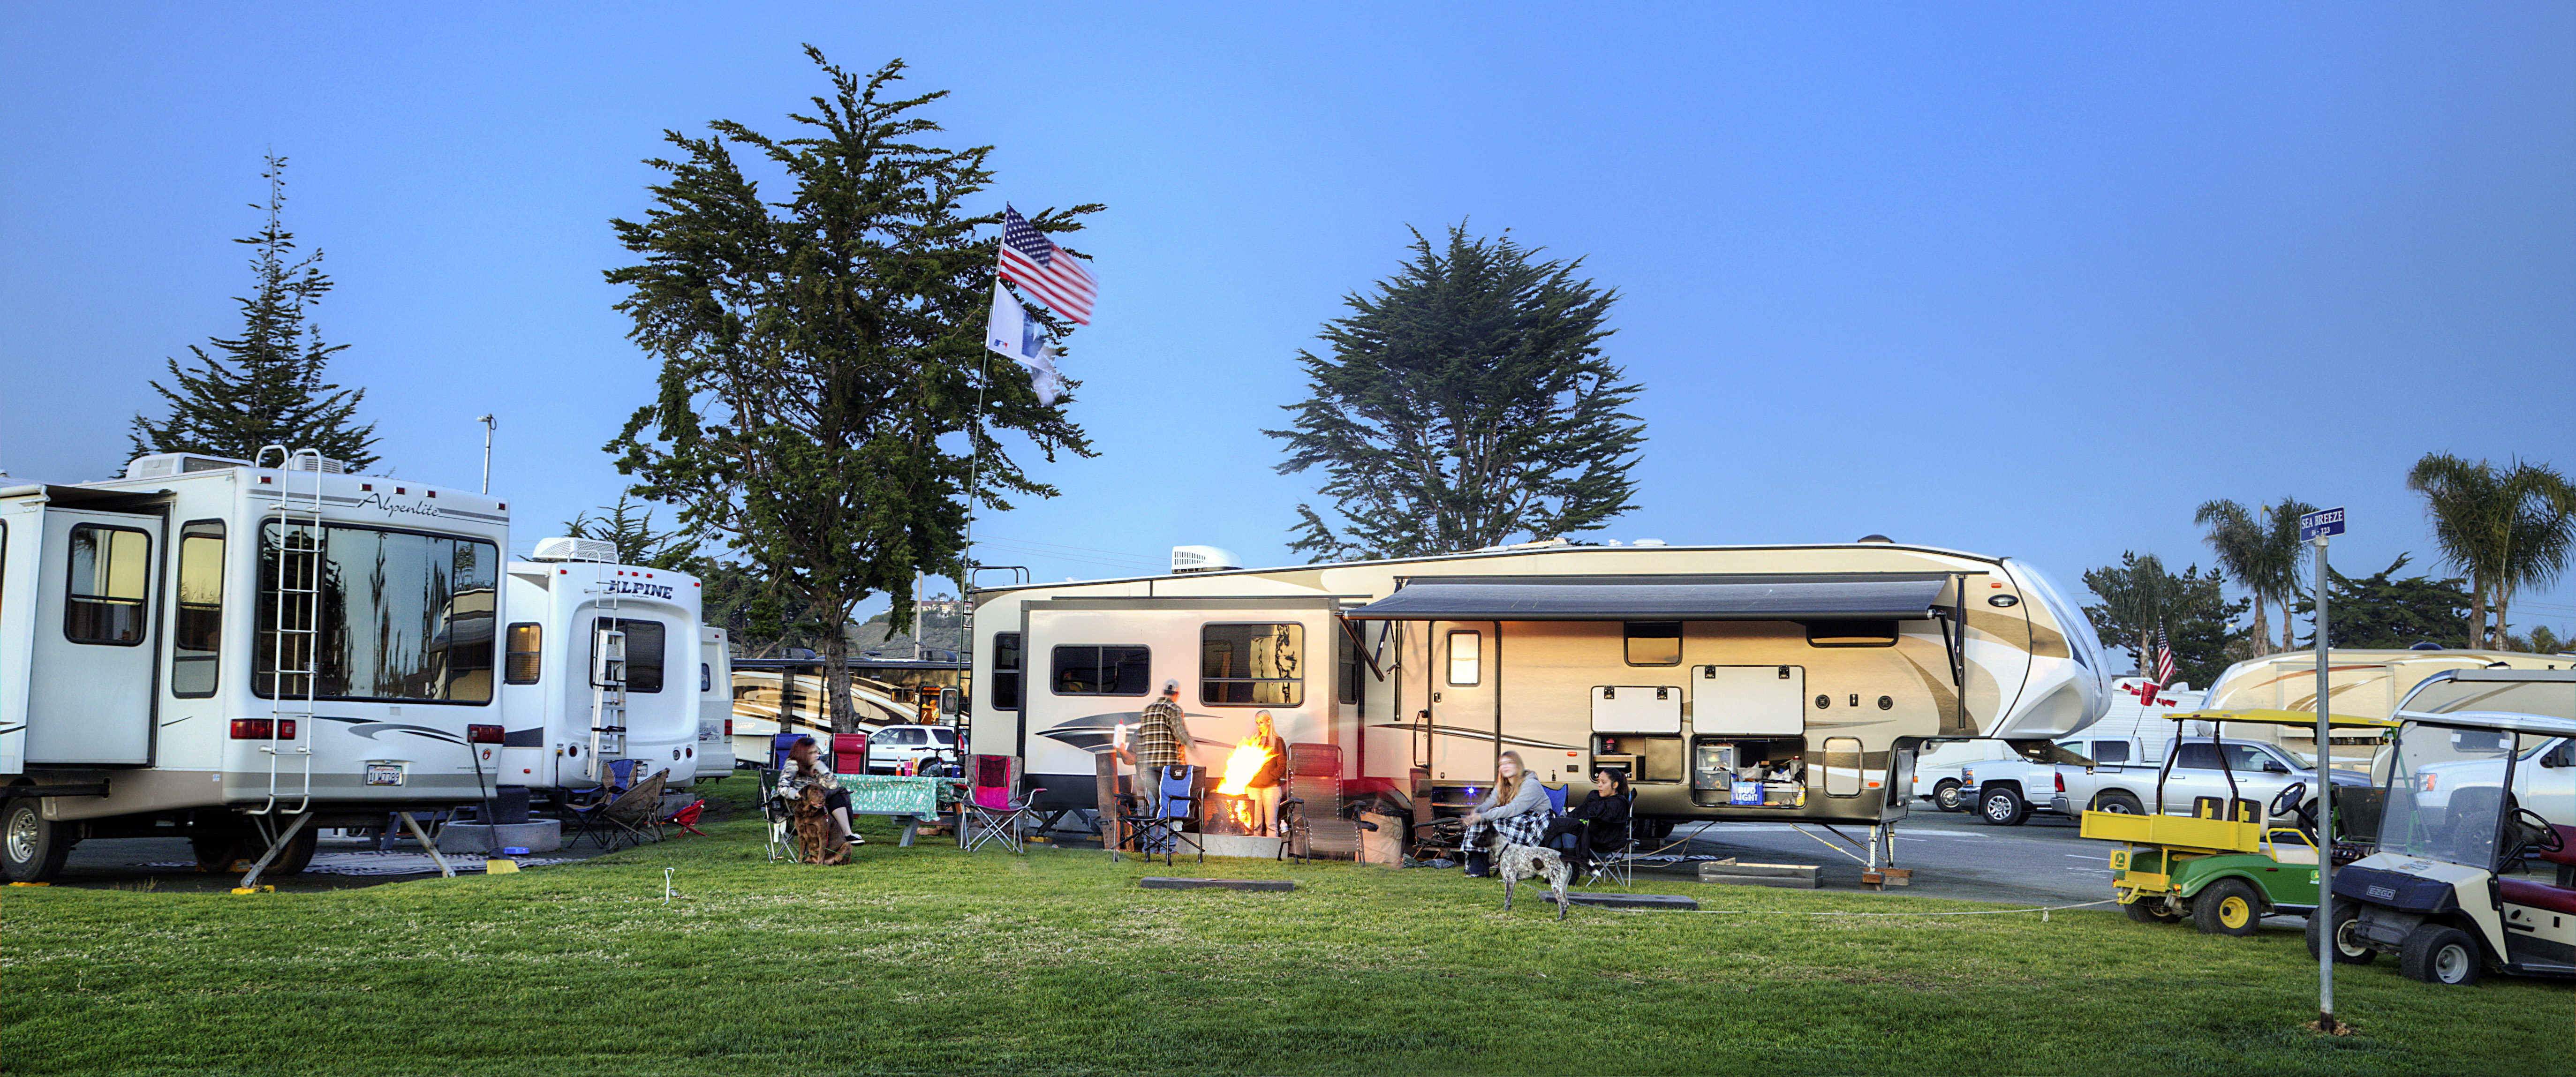 RV campers at Pismo Coast Village RV Resort with people in lawn chairs around firepit